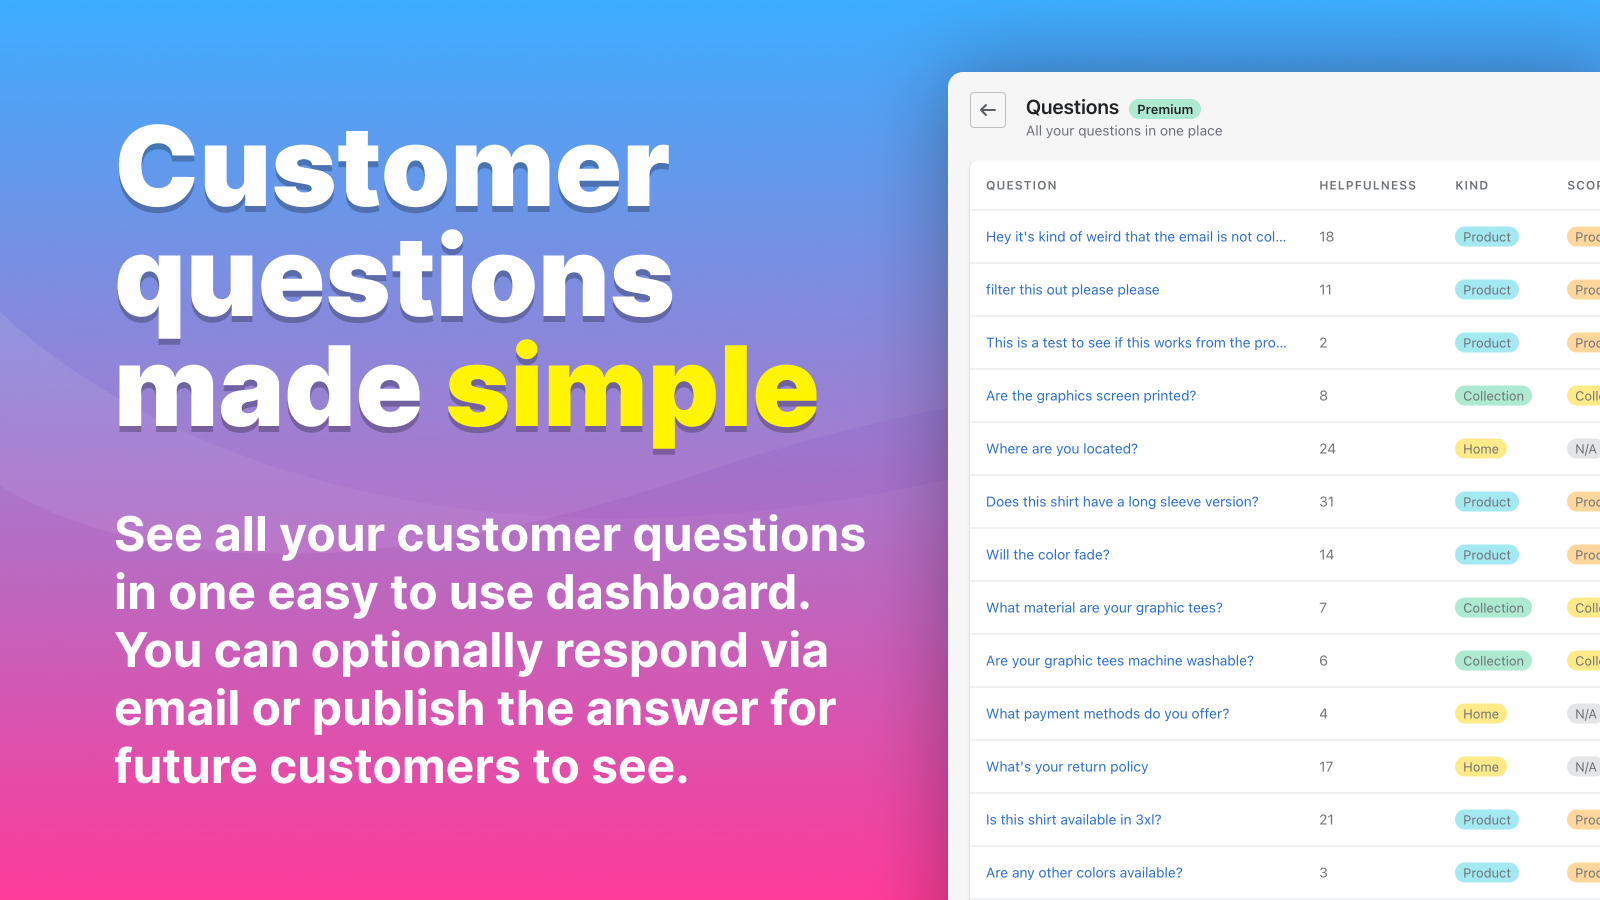 Customer questions made simple